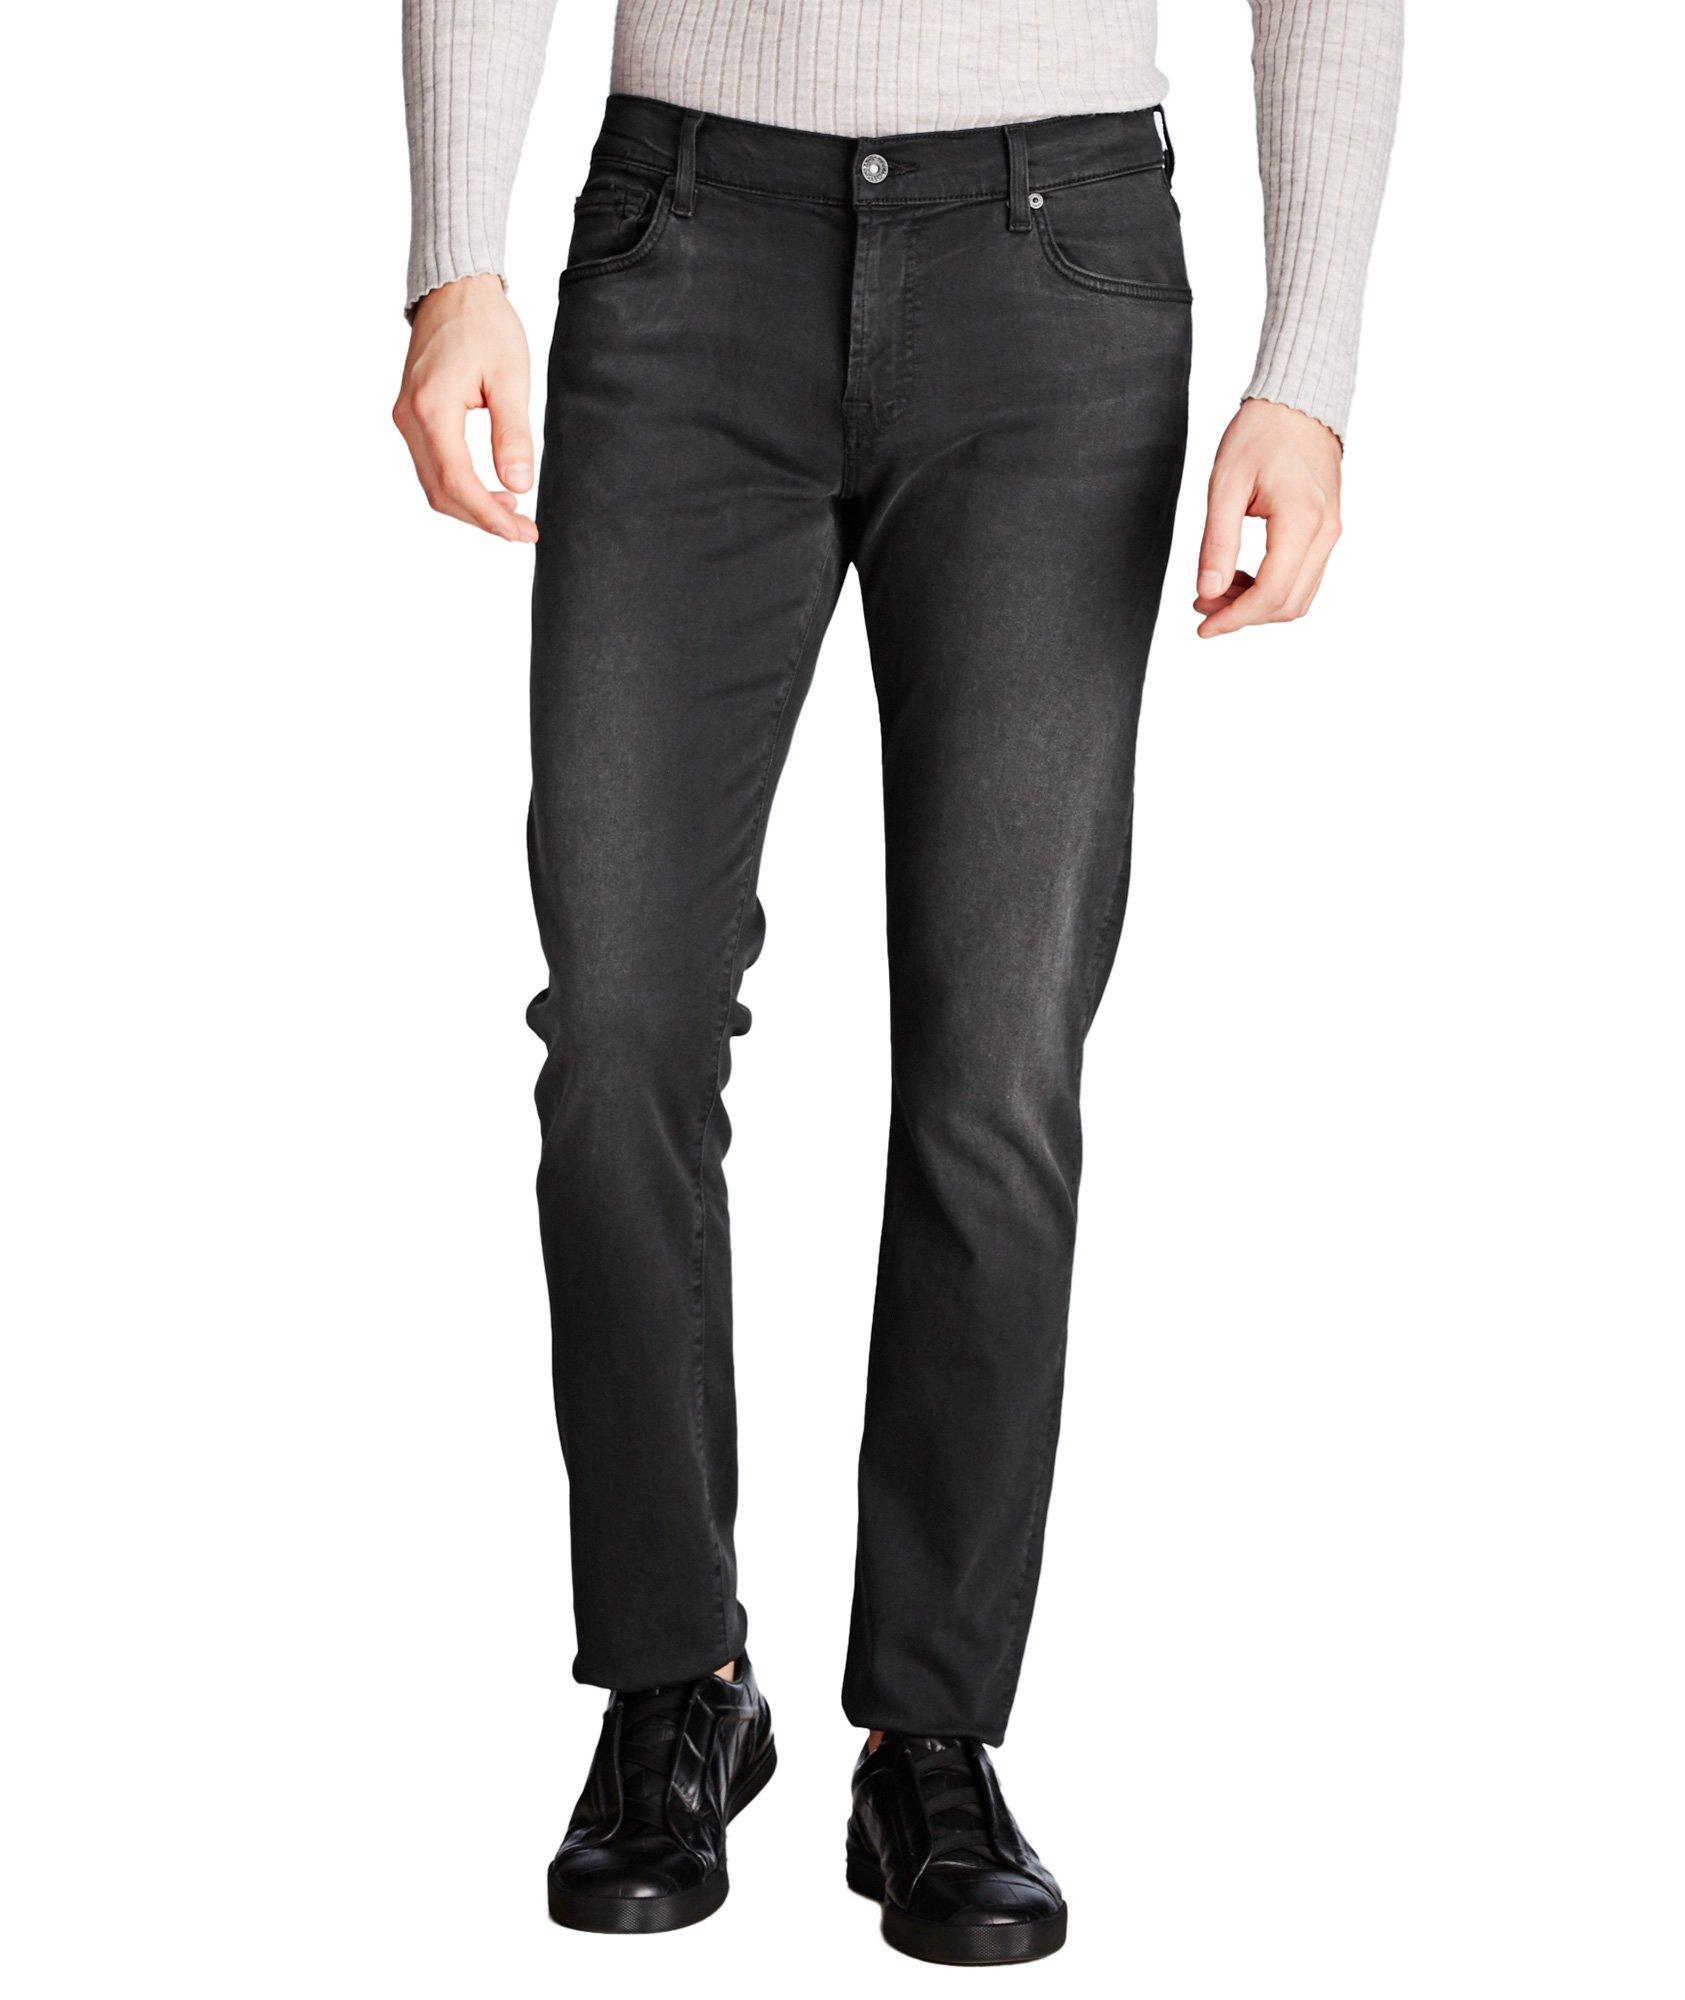 Paxtyn Luxe Sports Jeans image 0